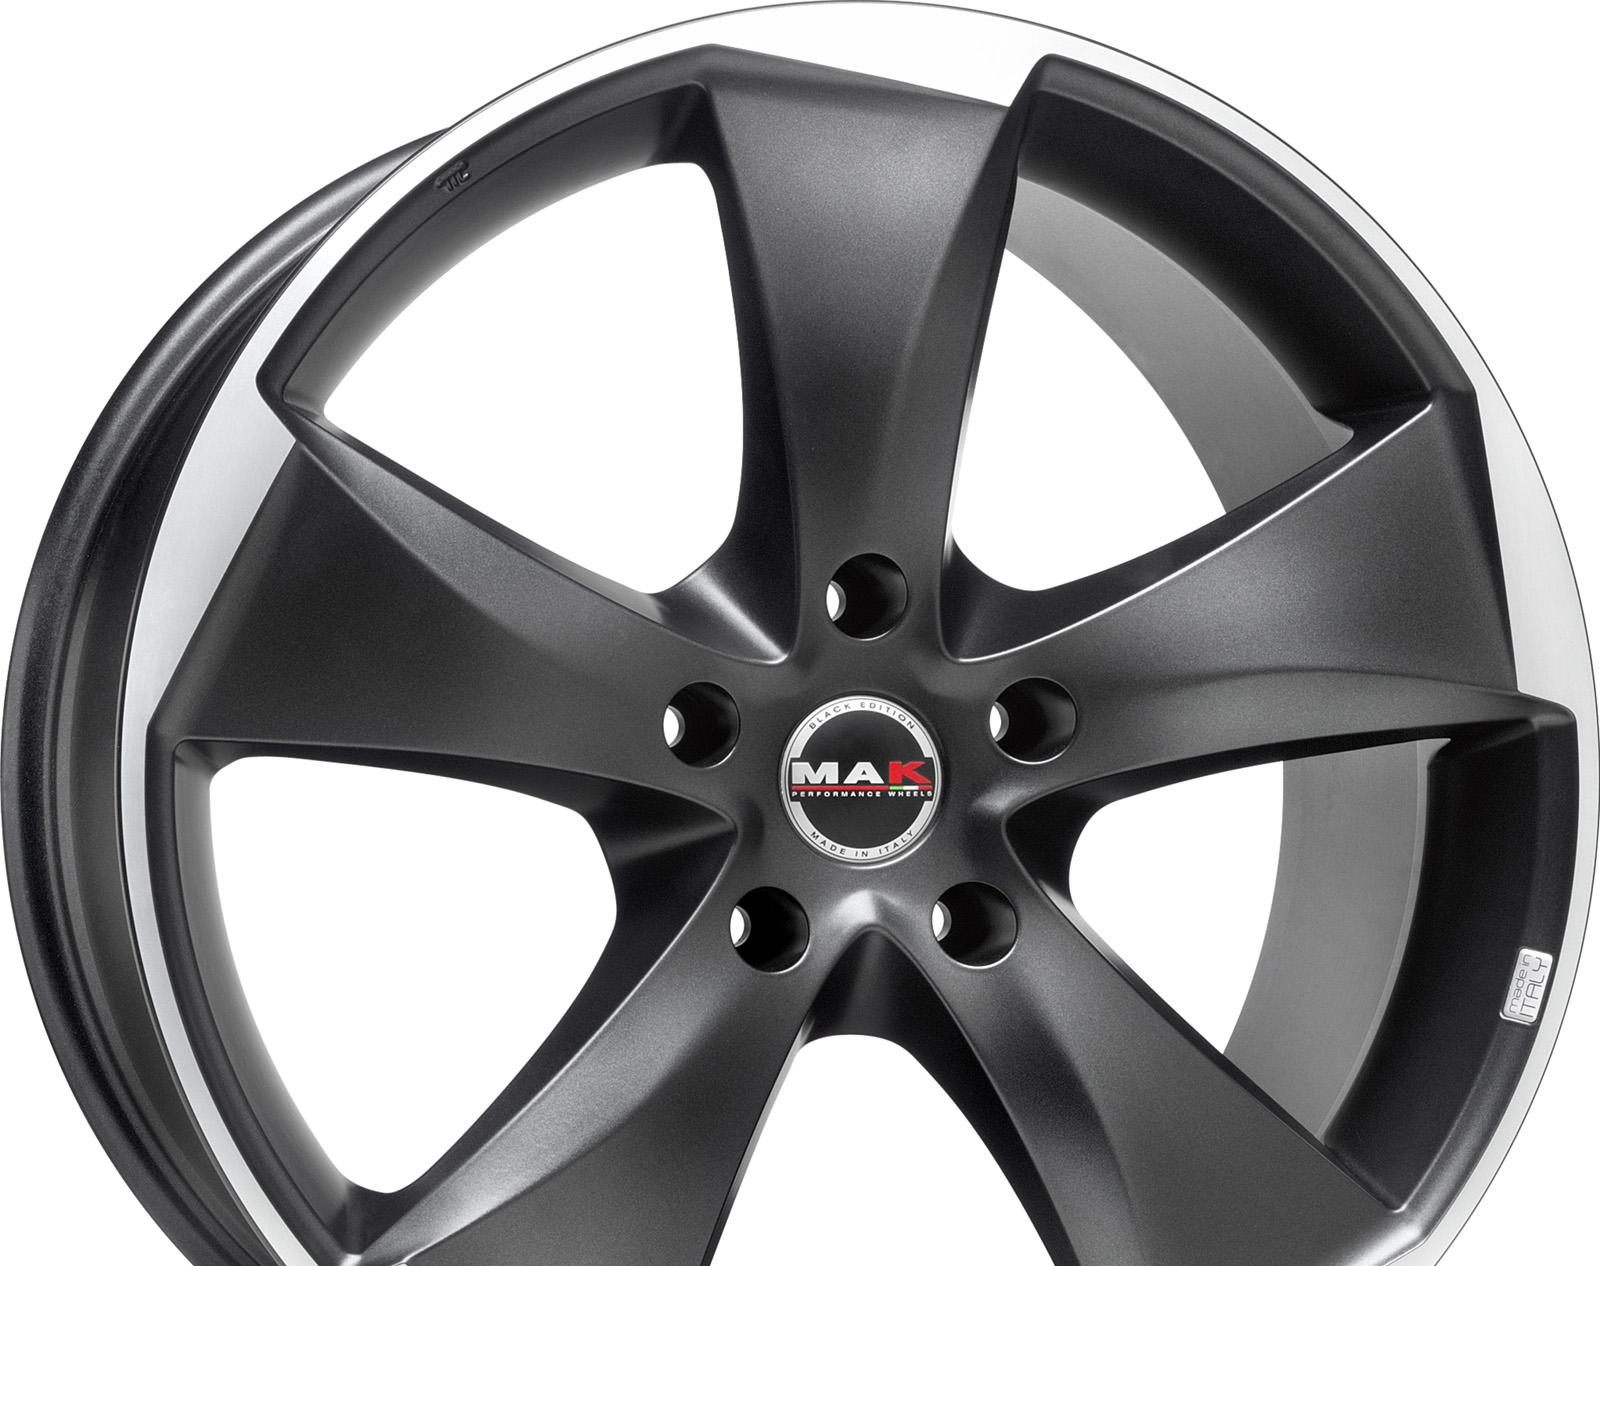 Wheel Mak Raptor 5 hyper Silver 20x9.5inches/5x130mm - picture, photo, image